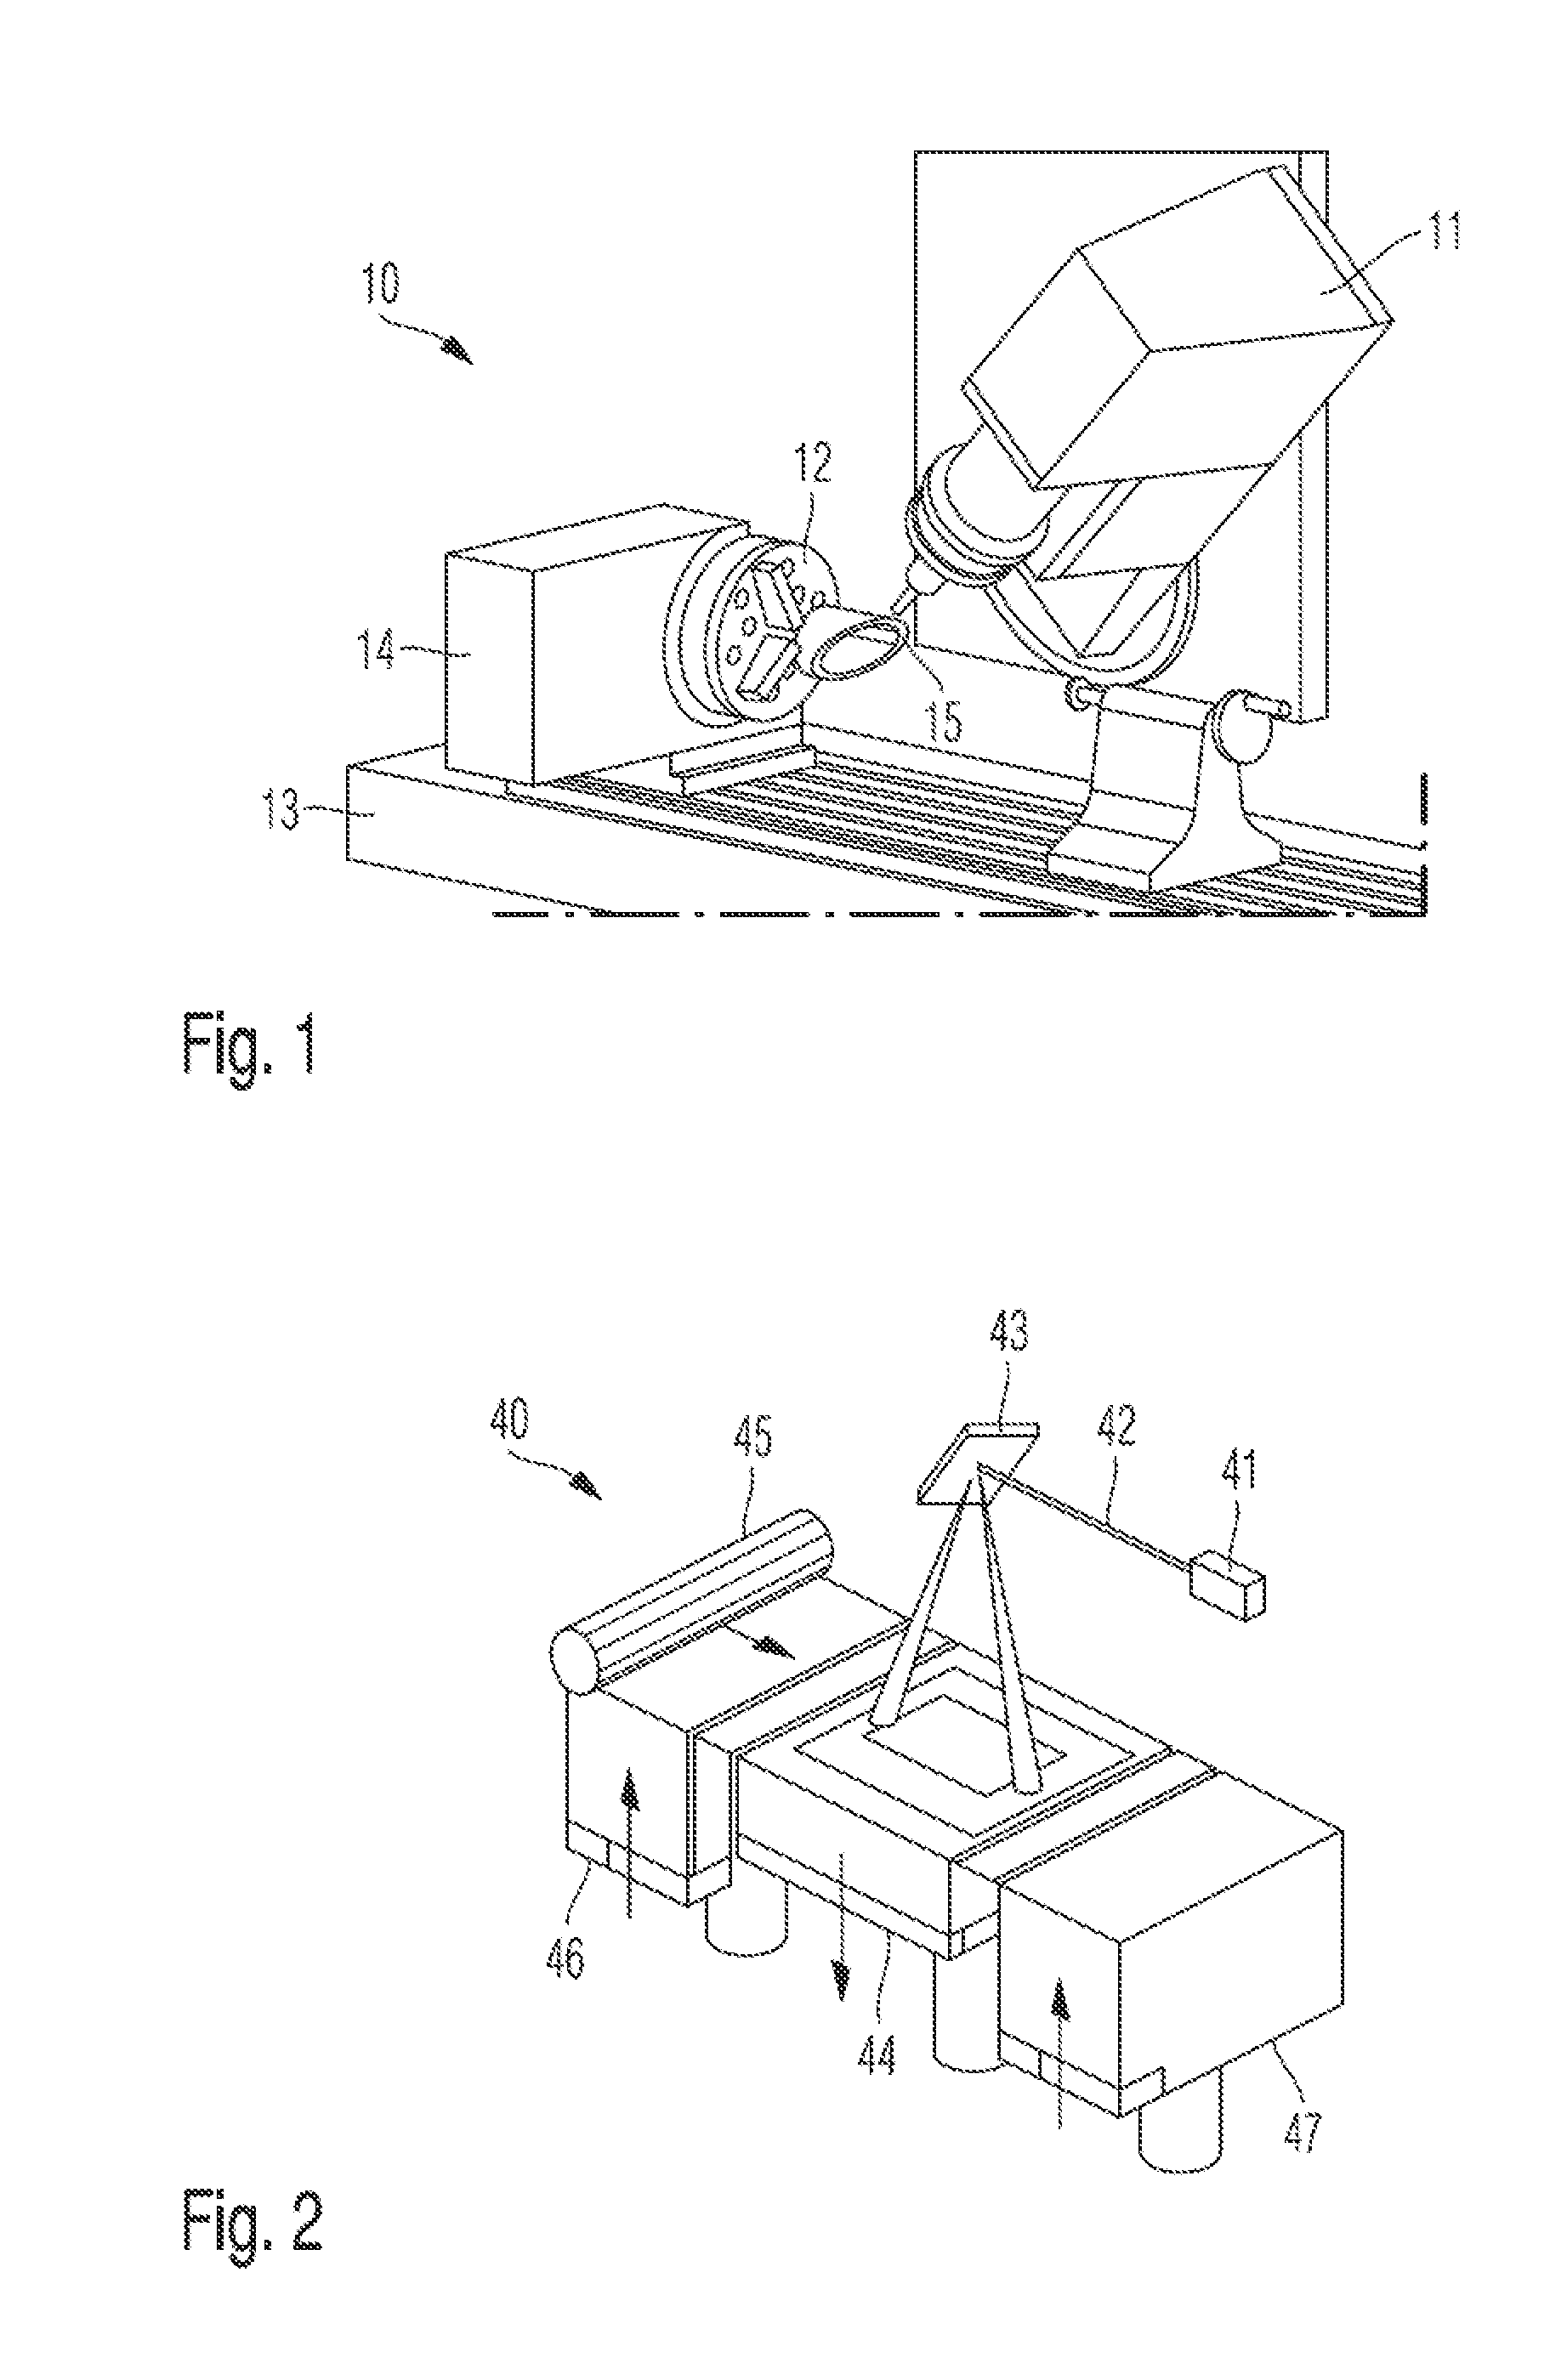 Manufacturing method and manufacturing tool for reinforced structural elements